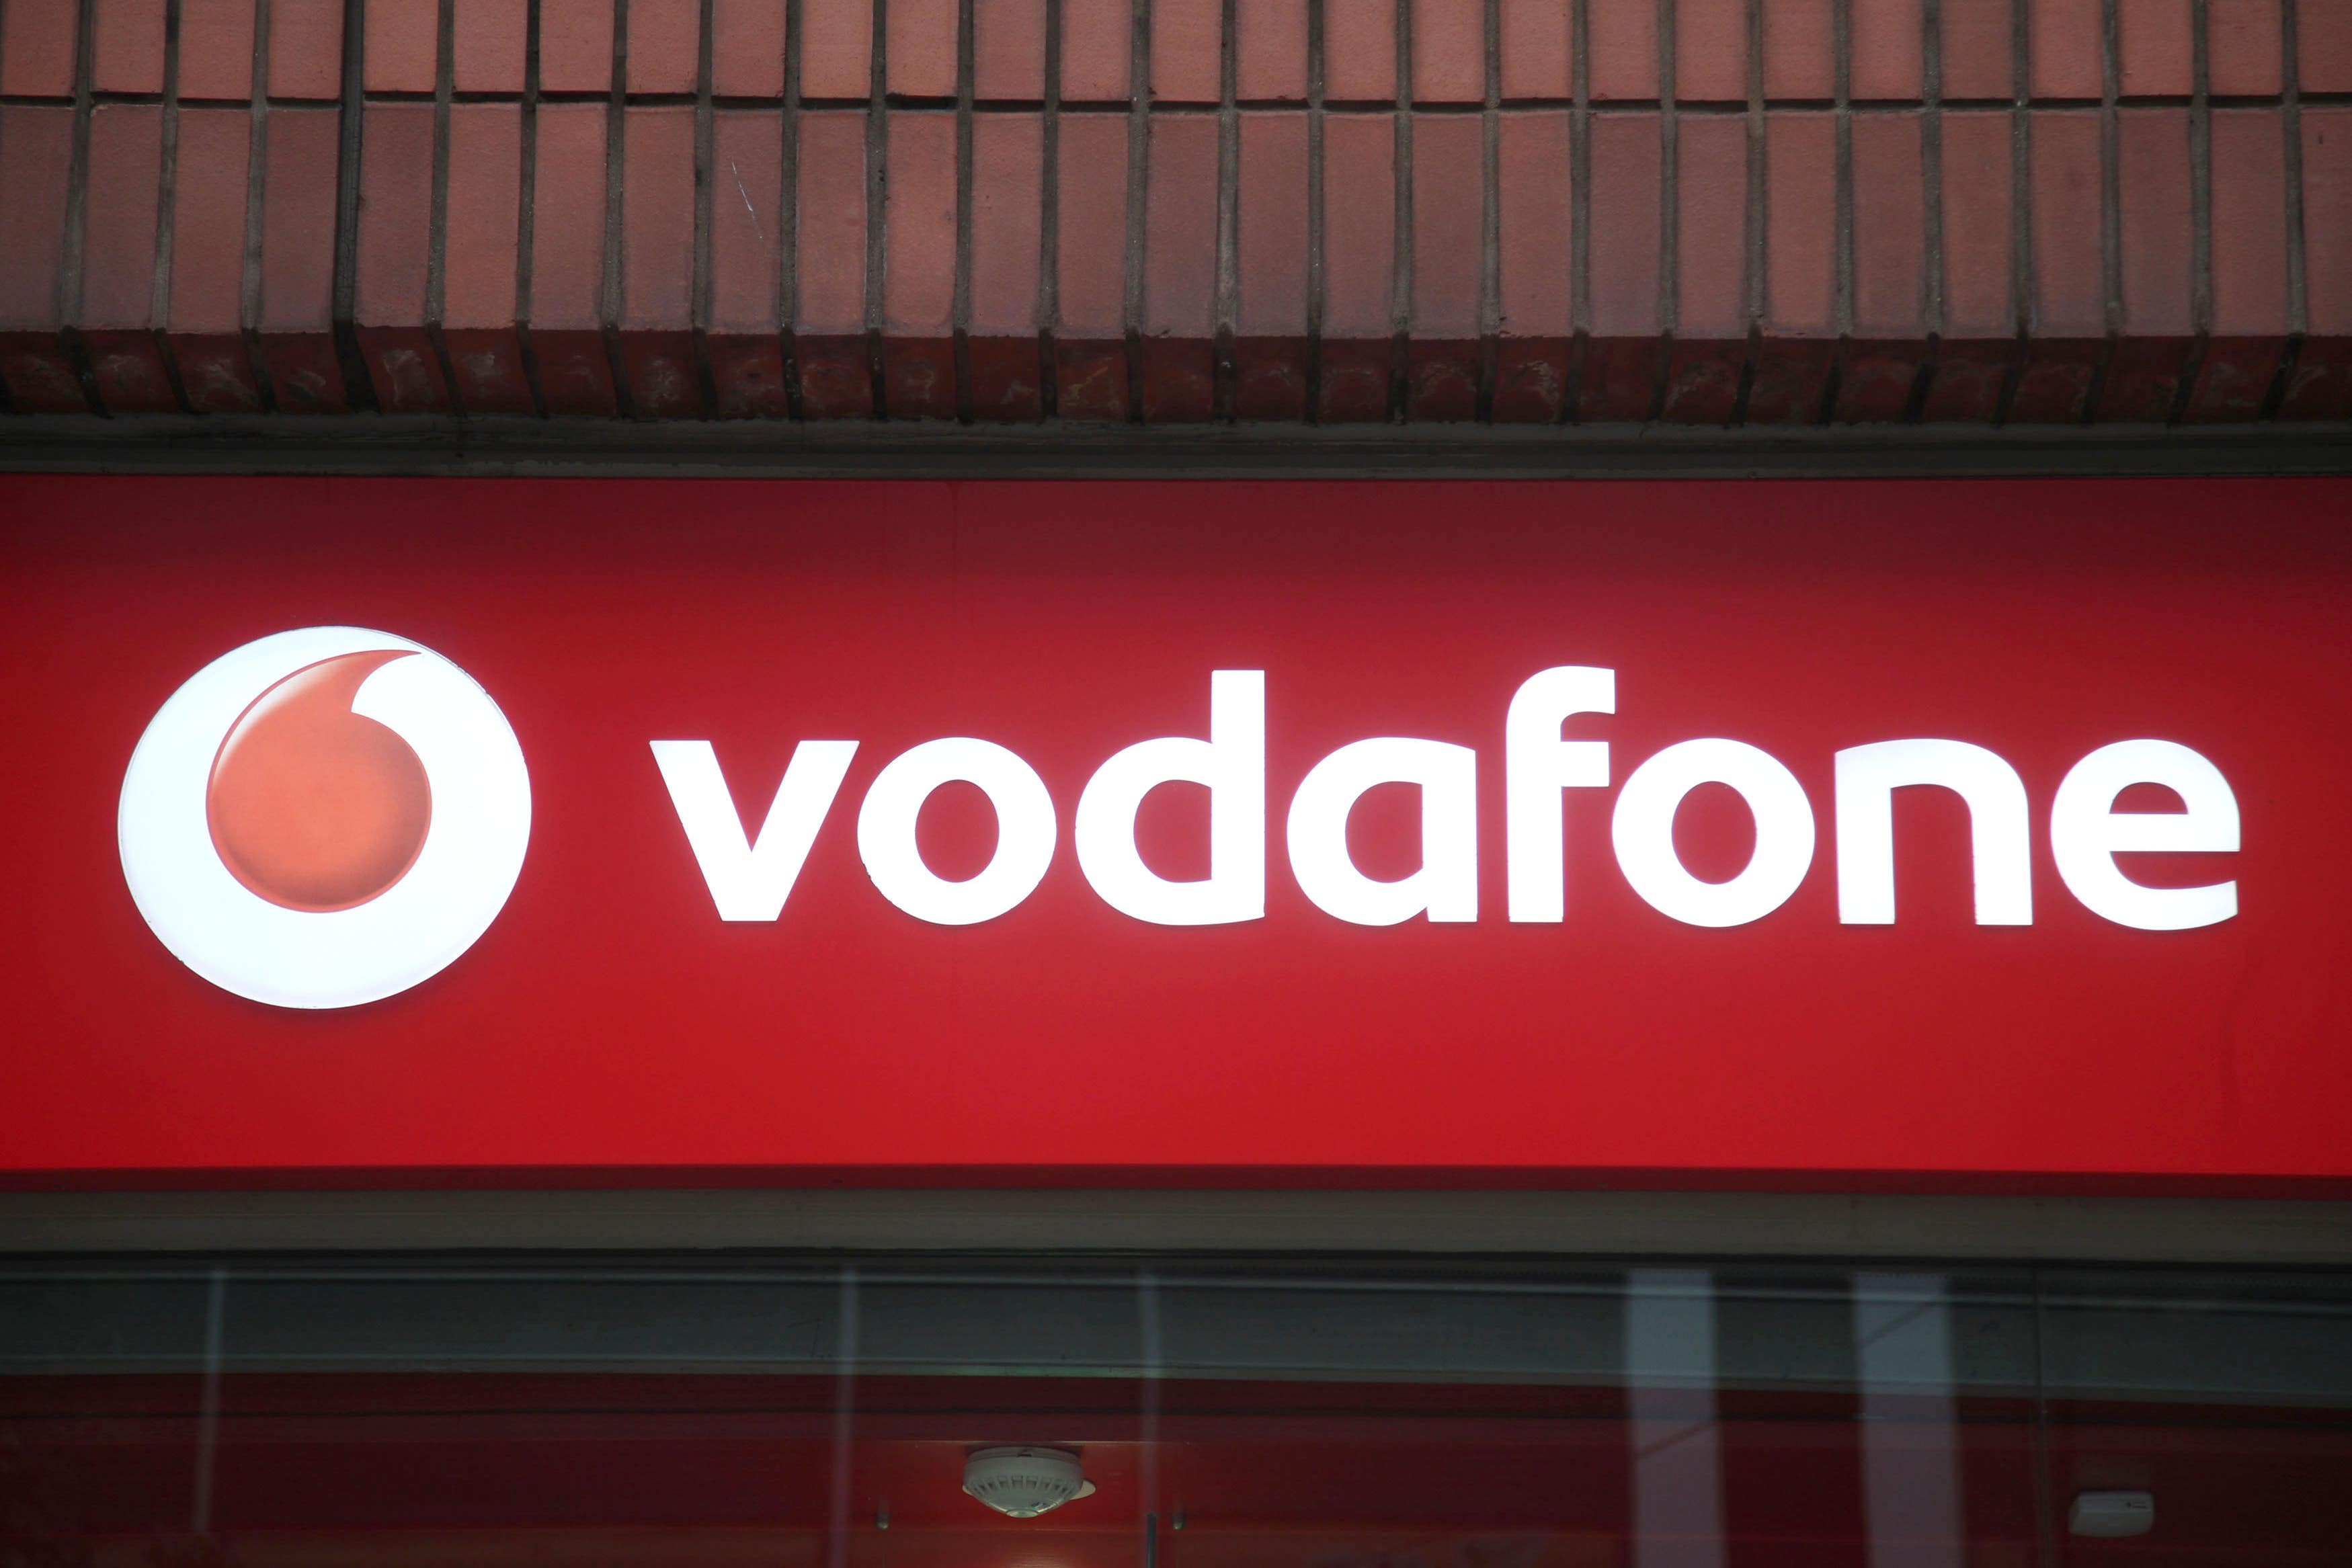 Mobile phone giant Vodafone is cutting jobs